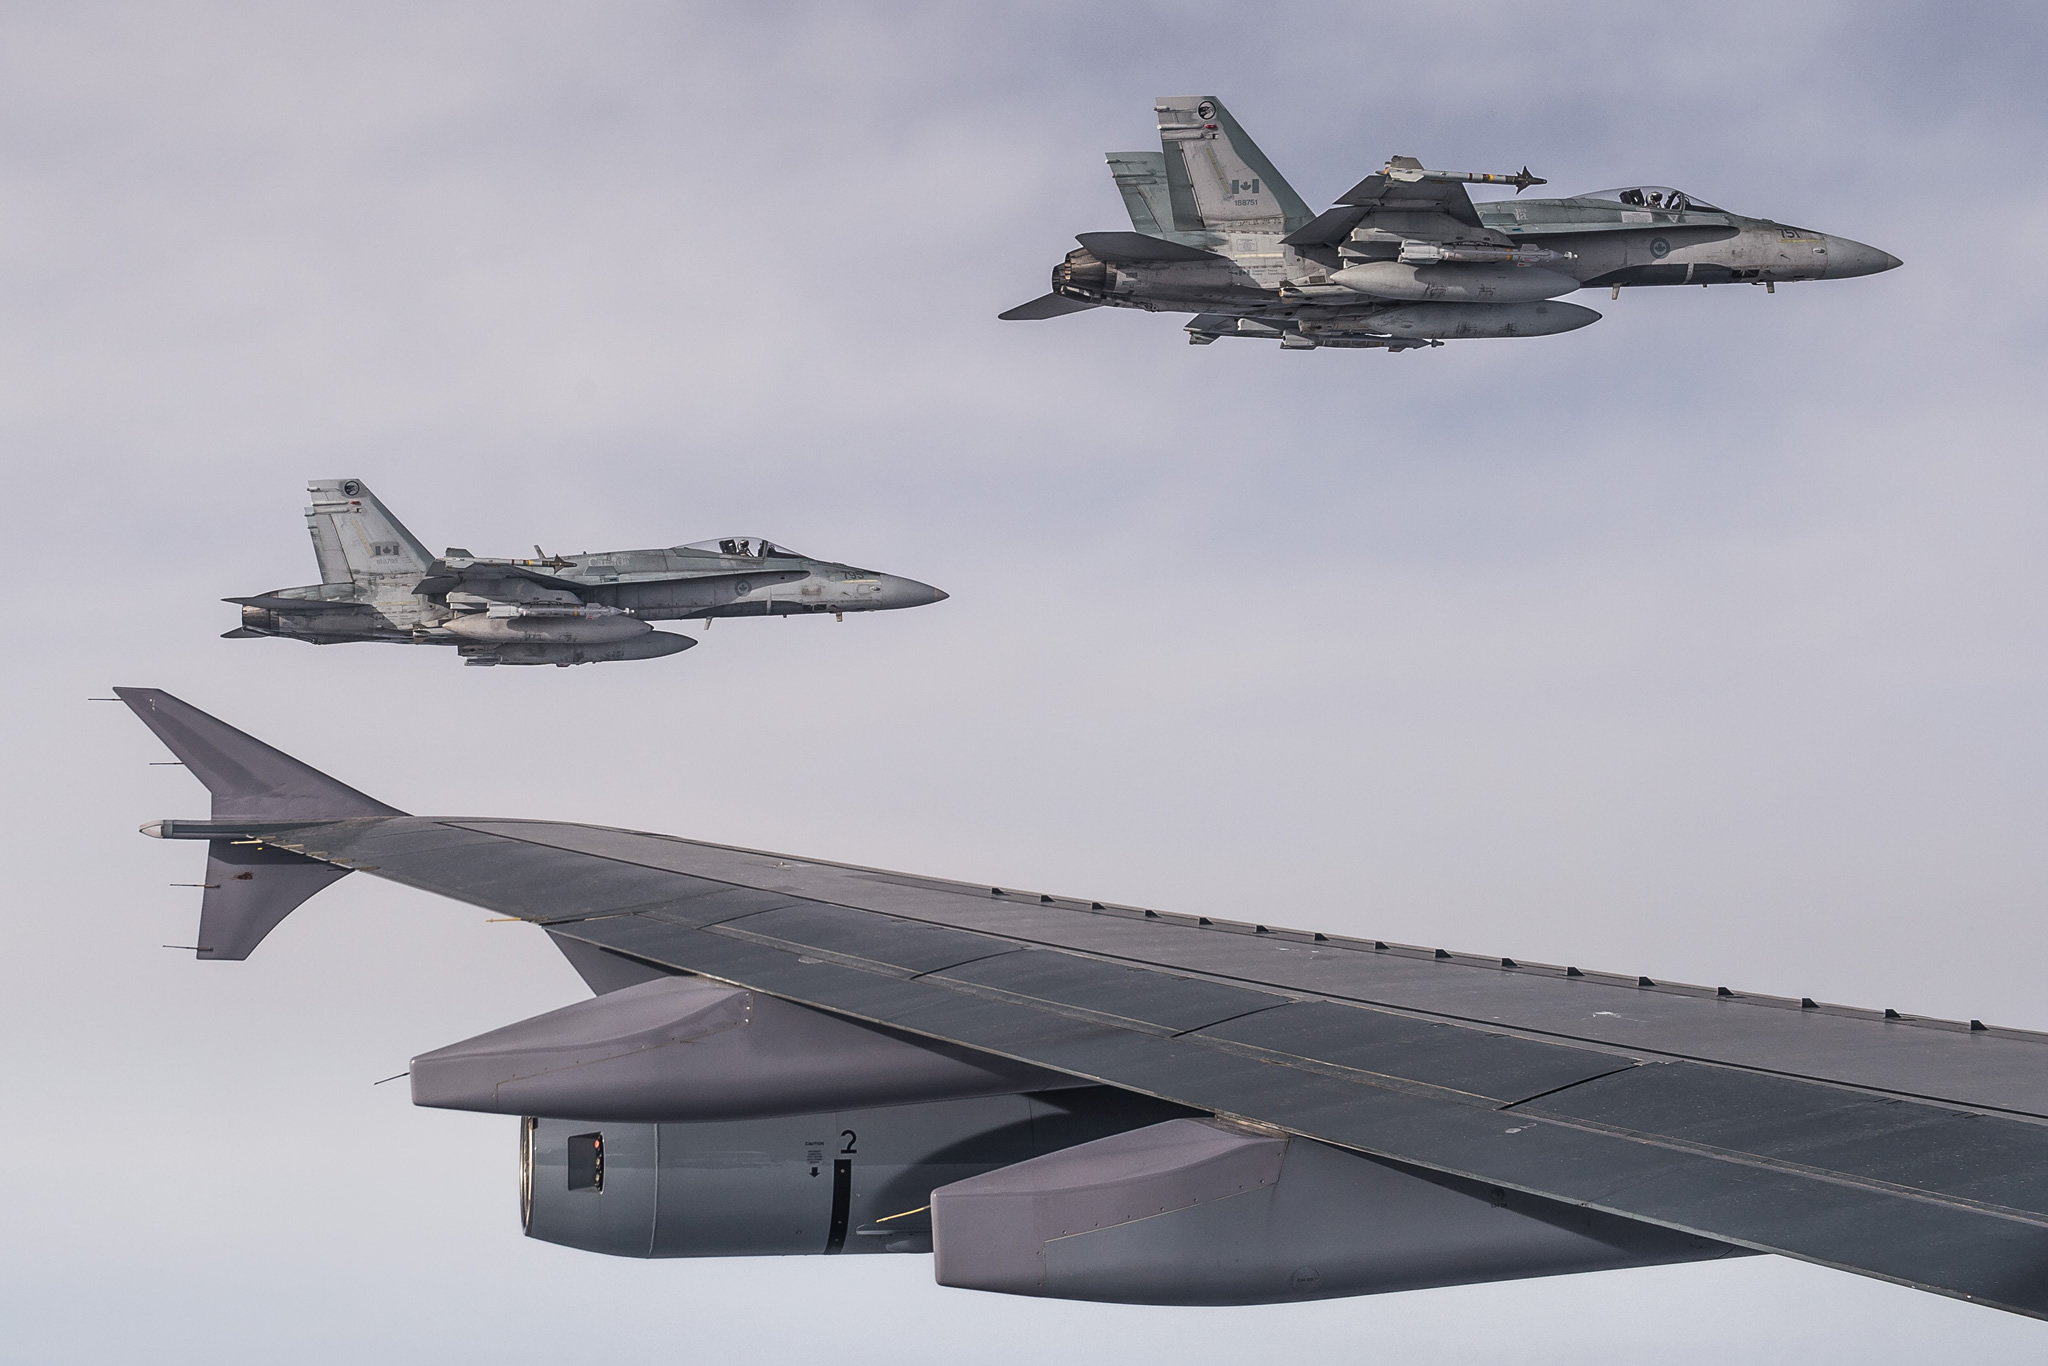 4 February 2015 - Two CF-18 Hornets escort a CC-150 Polaris after being refueled during Operation IMPACT on February 4, 2015. (Photo: Canadian Forces Combat Camera, DND)